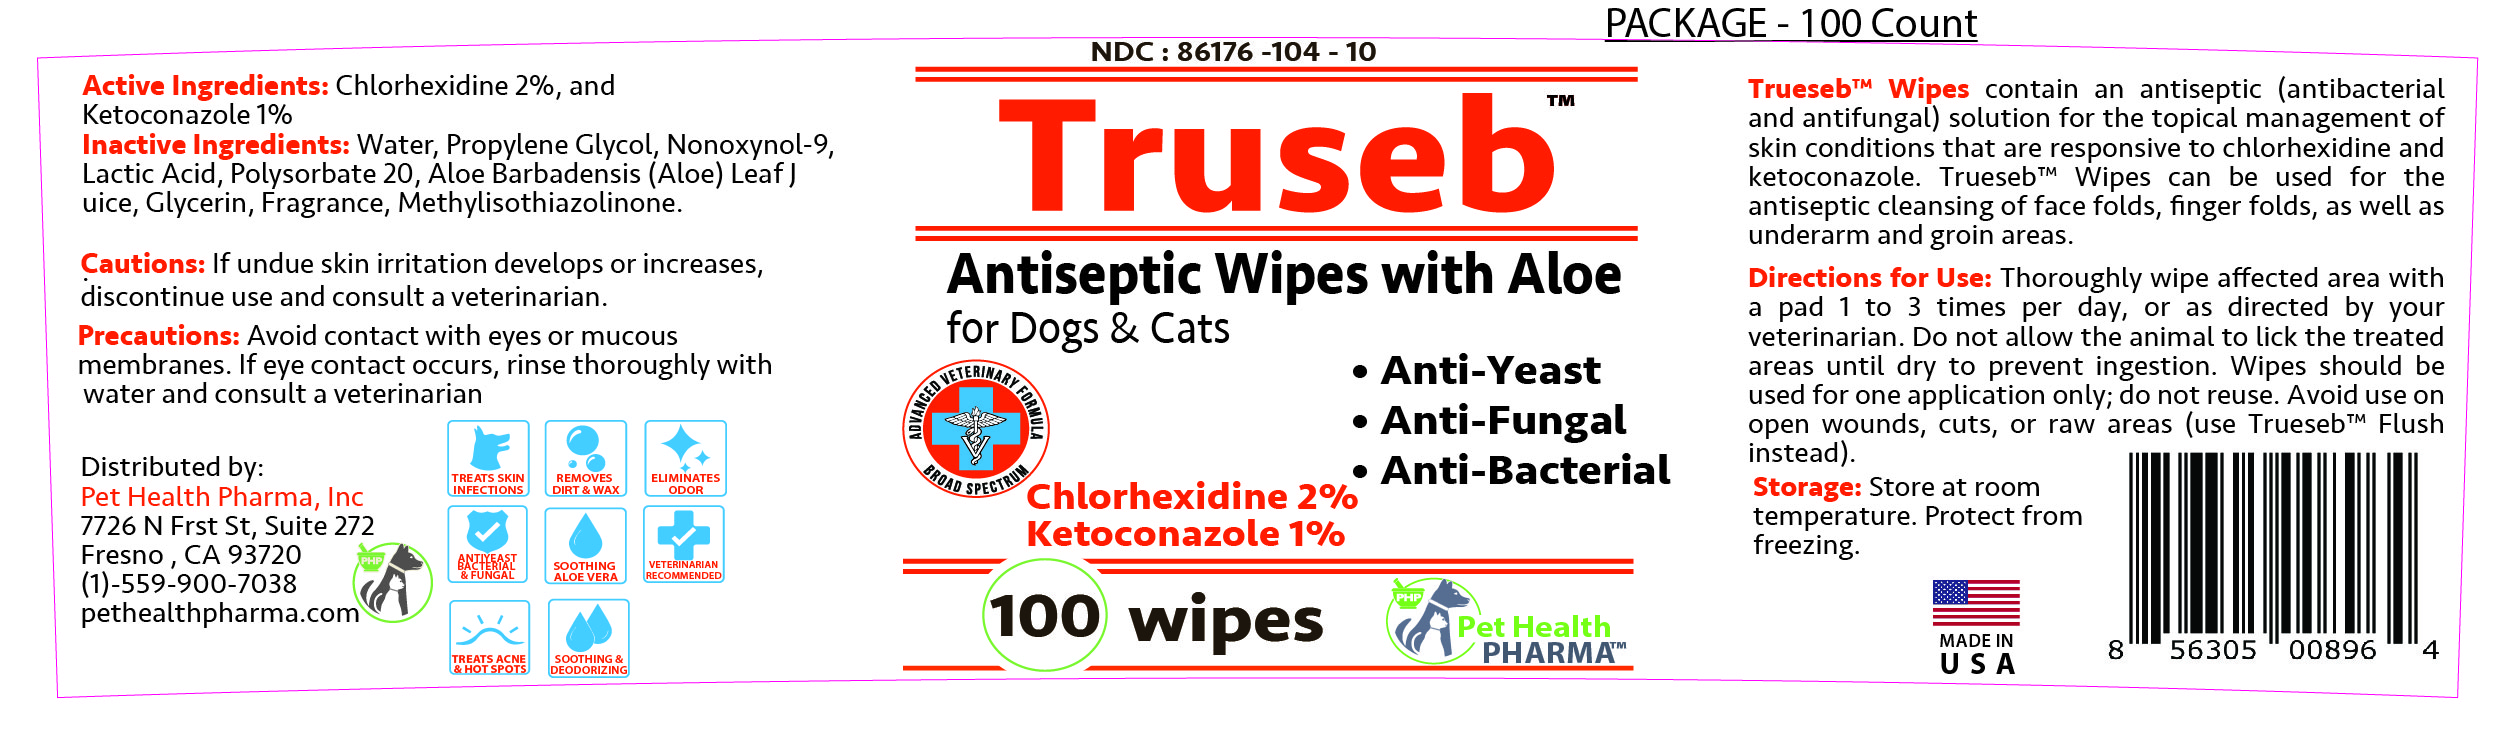 Truseb Antiseptic Wipes with Aloe for Dogs And Cats 100 count